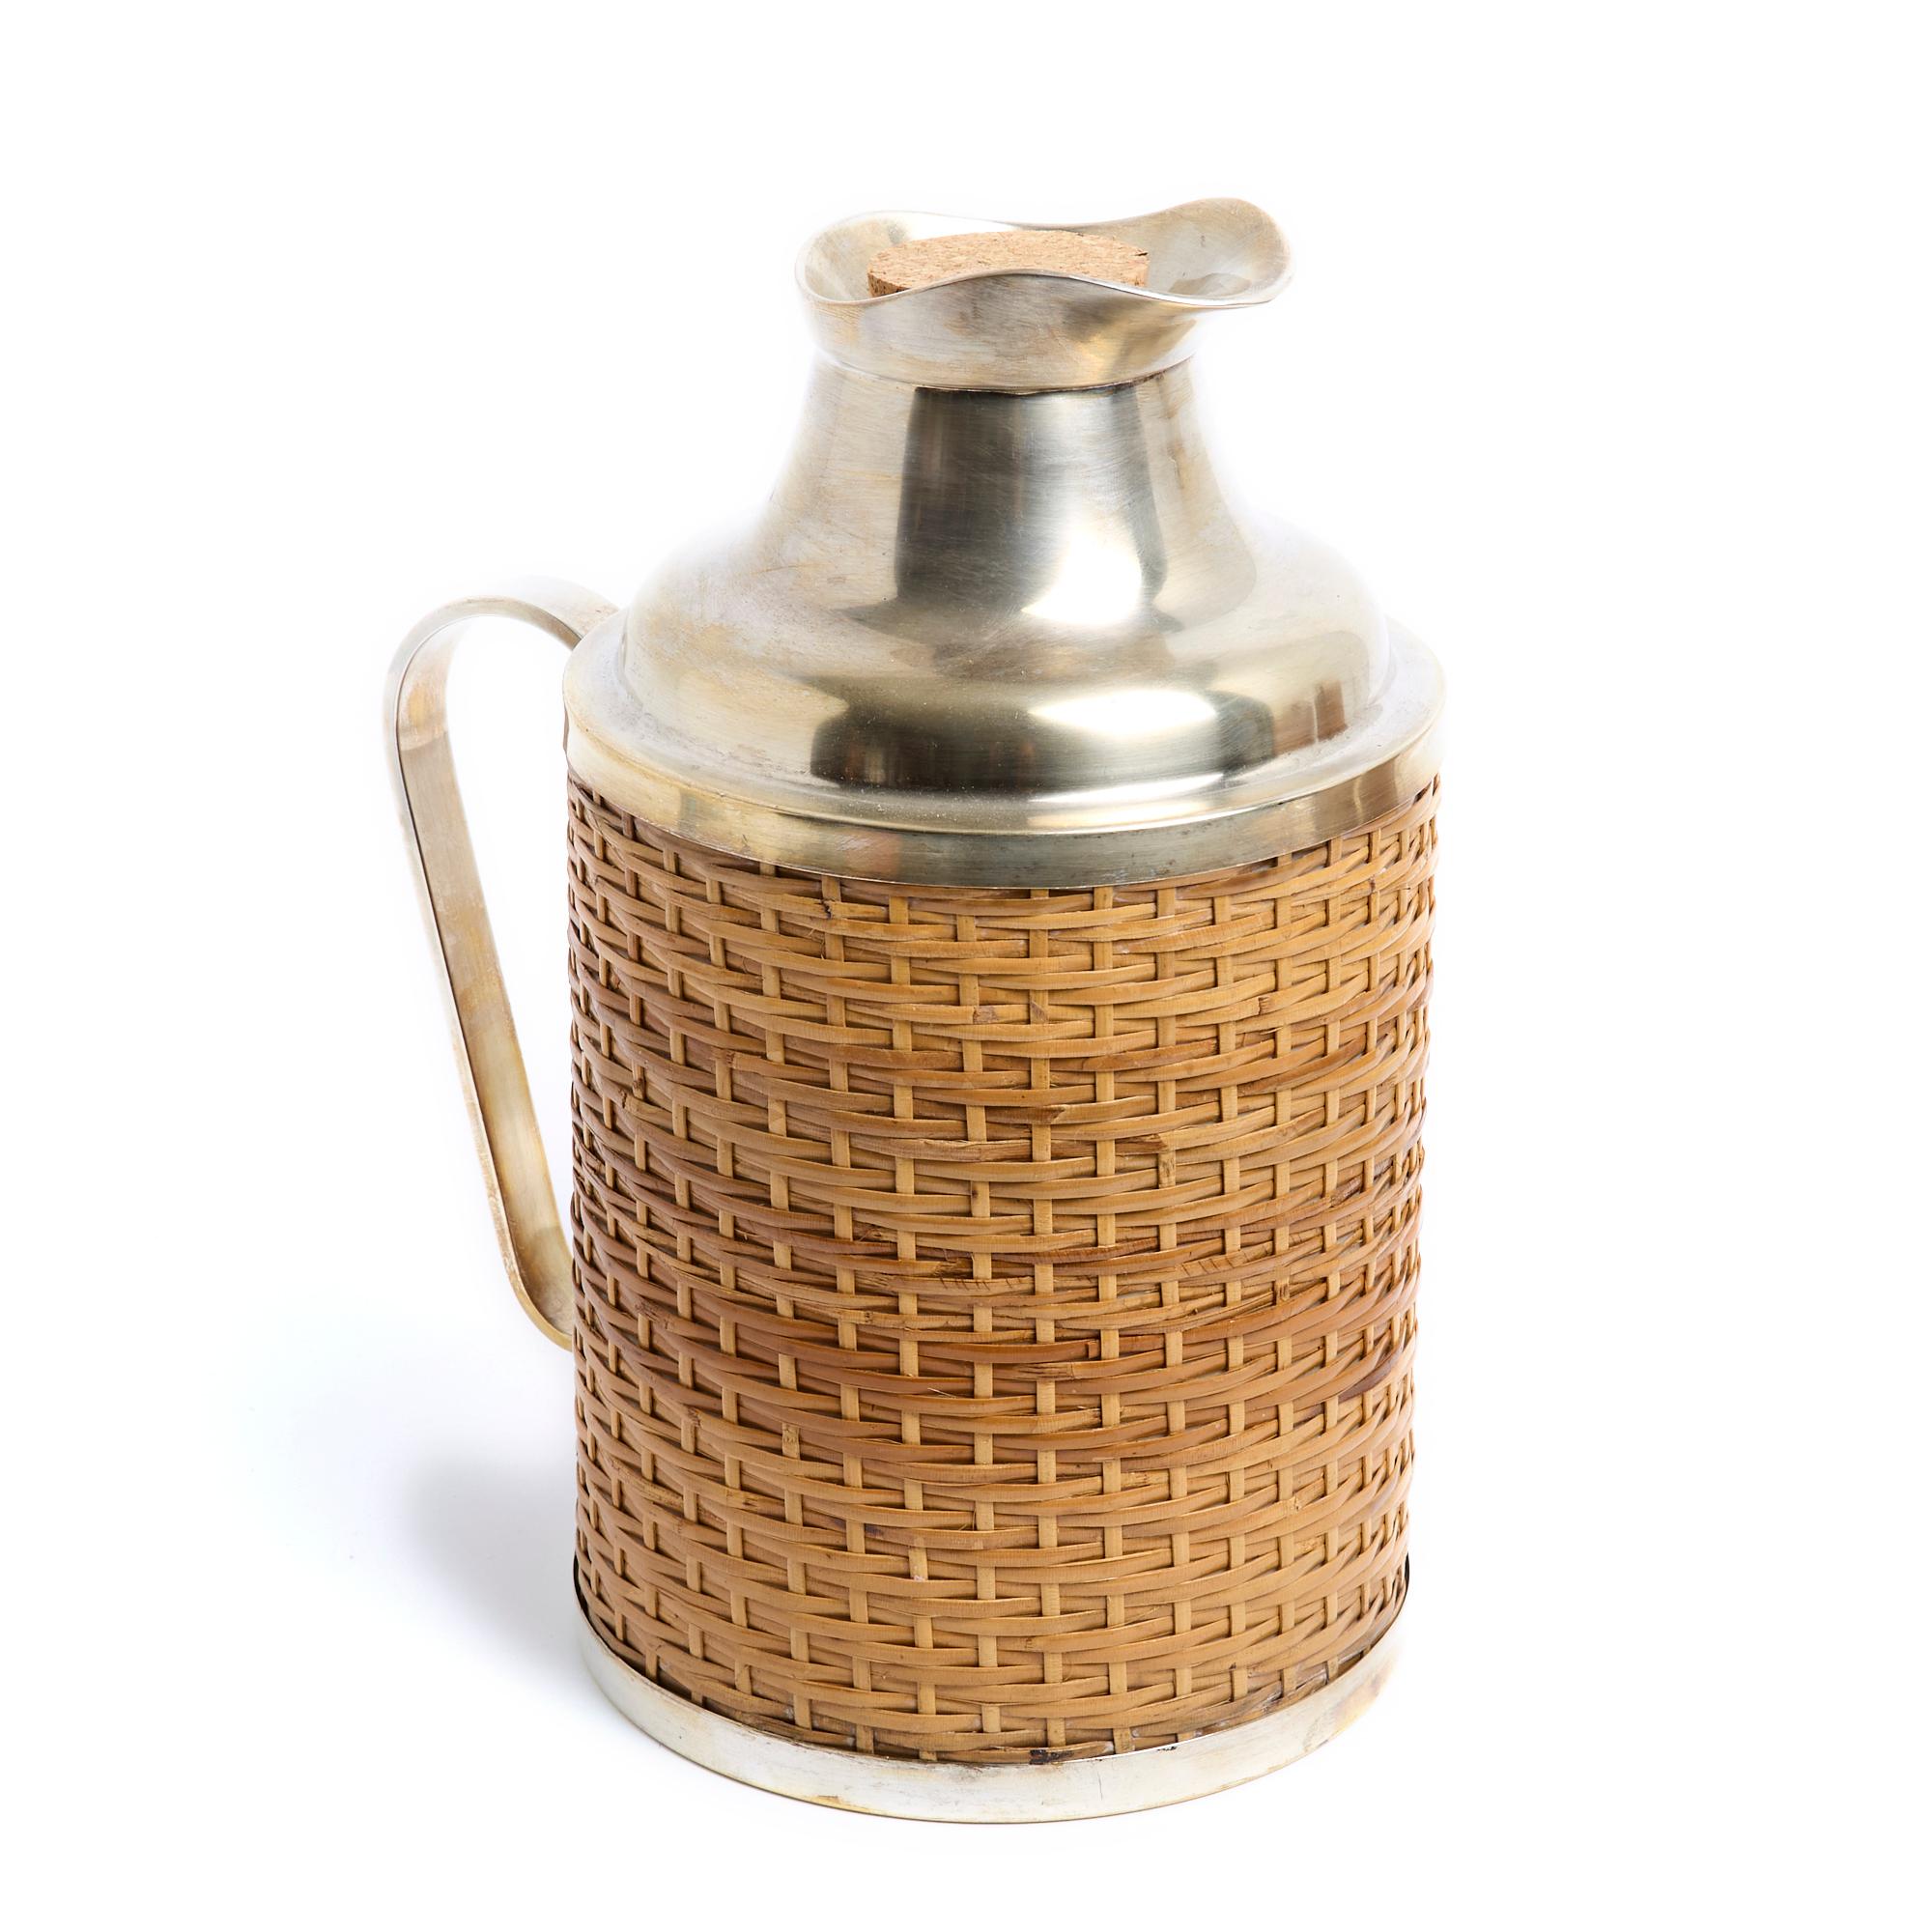 Christian Dior Maison picnic set in silver metal partially covered with wicker composed of a thermos for tea, a second for coffee and a bottle cooler. Dimensions of the 3 pieces - Tea thermos: height 25 cm x diameter 14.5 cm - Coffee thermos: height